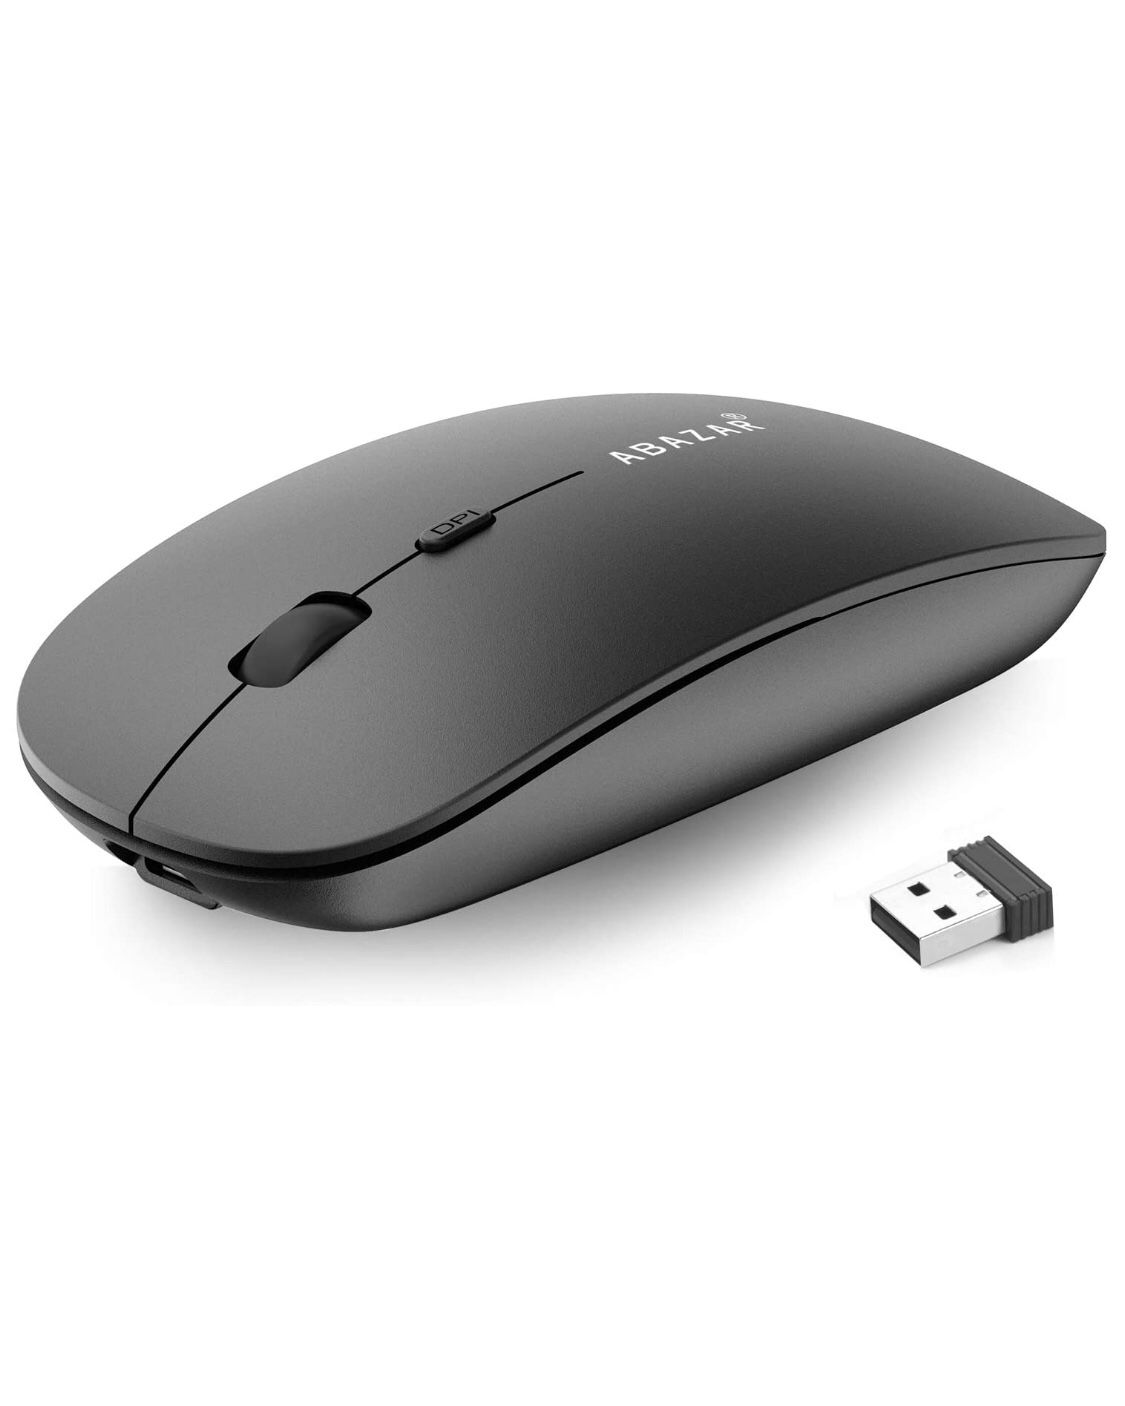 Brand new! Wireless Mouse, Rechargeable 2.4G Slim Optical Computer Mice with Nano Receiver, 1600/1200/800 Adjustable DPI, Silent Click, Cordless & Qui